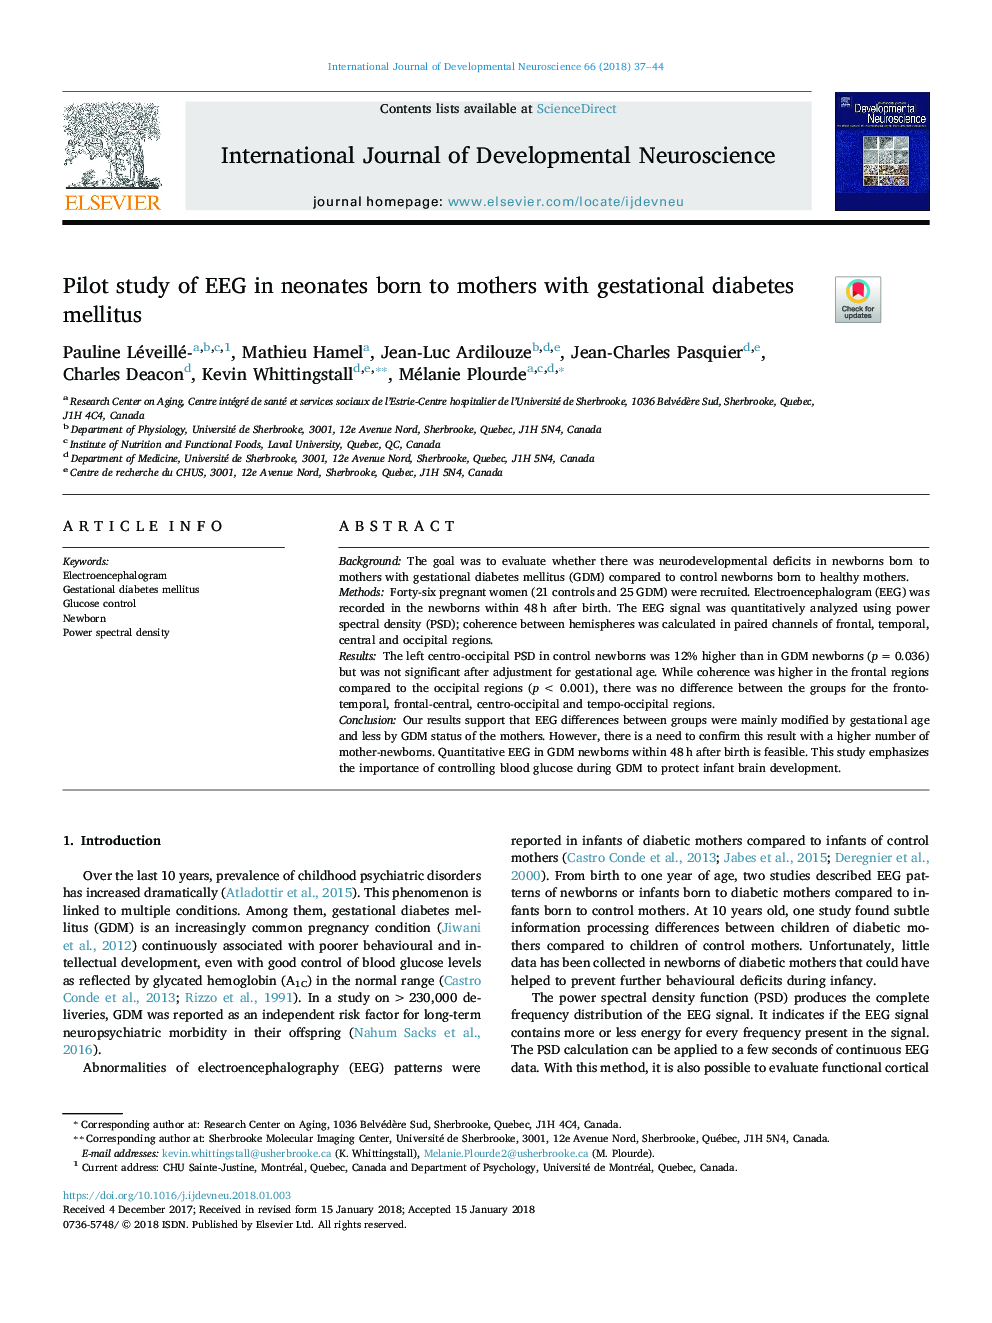 Pilot study of EEG in neonates born to mothers with gestational diabetes mellitus